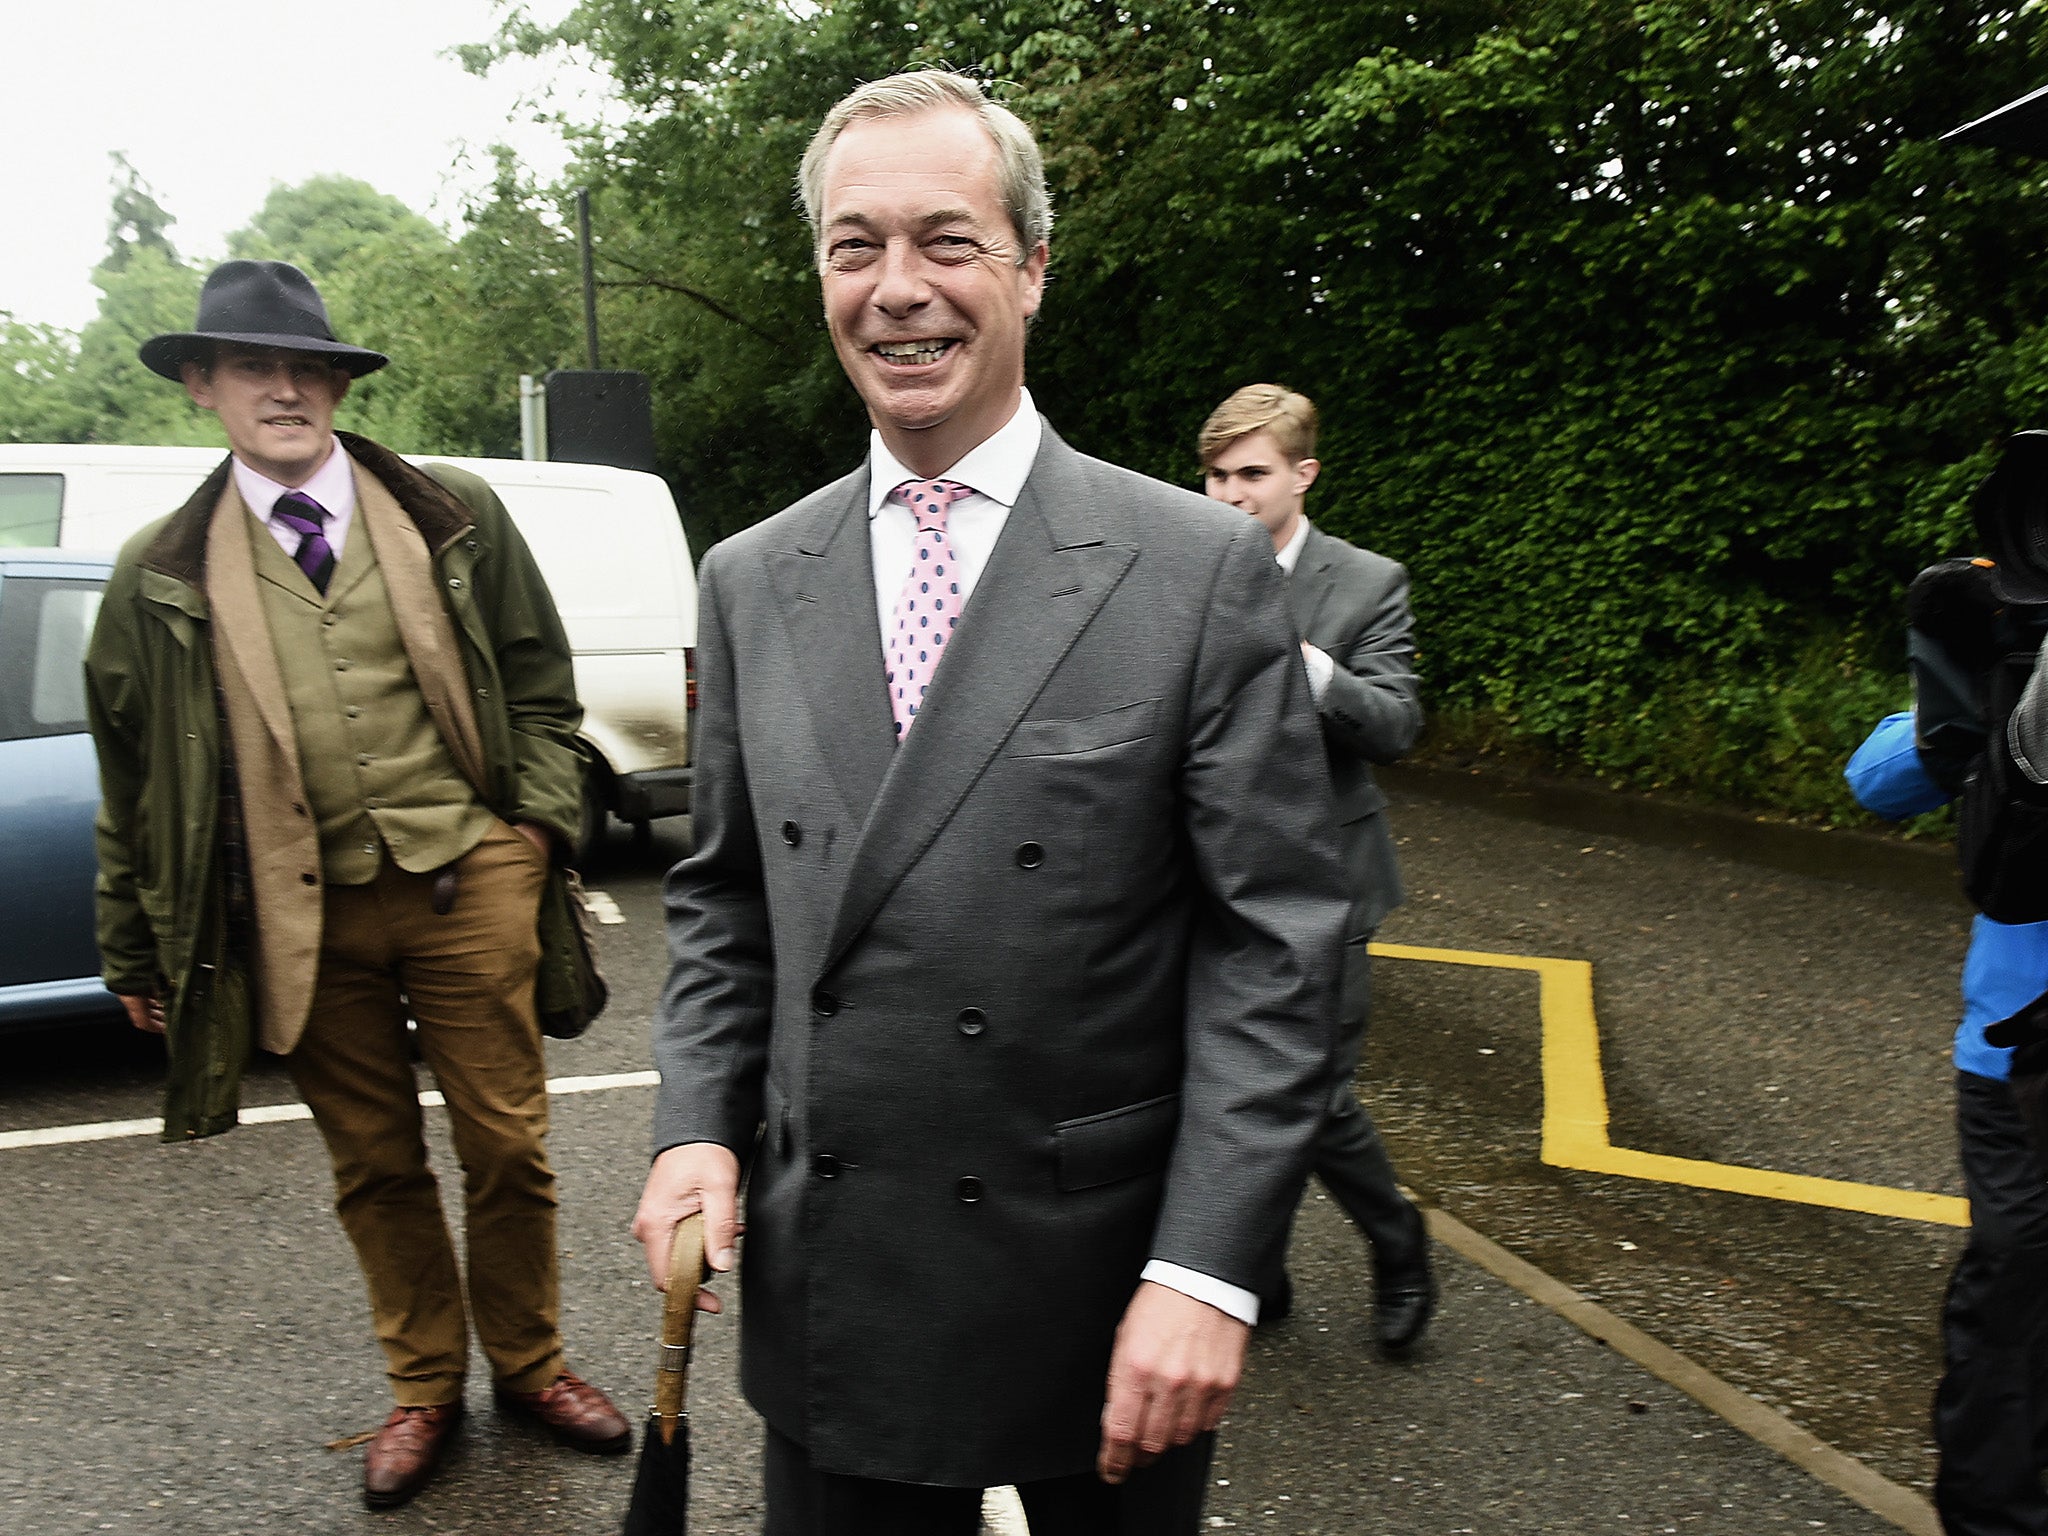 Those who voted for Farage's party in 2015 this year split their vote between Labour and Tory candidates (Getty)